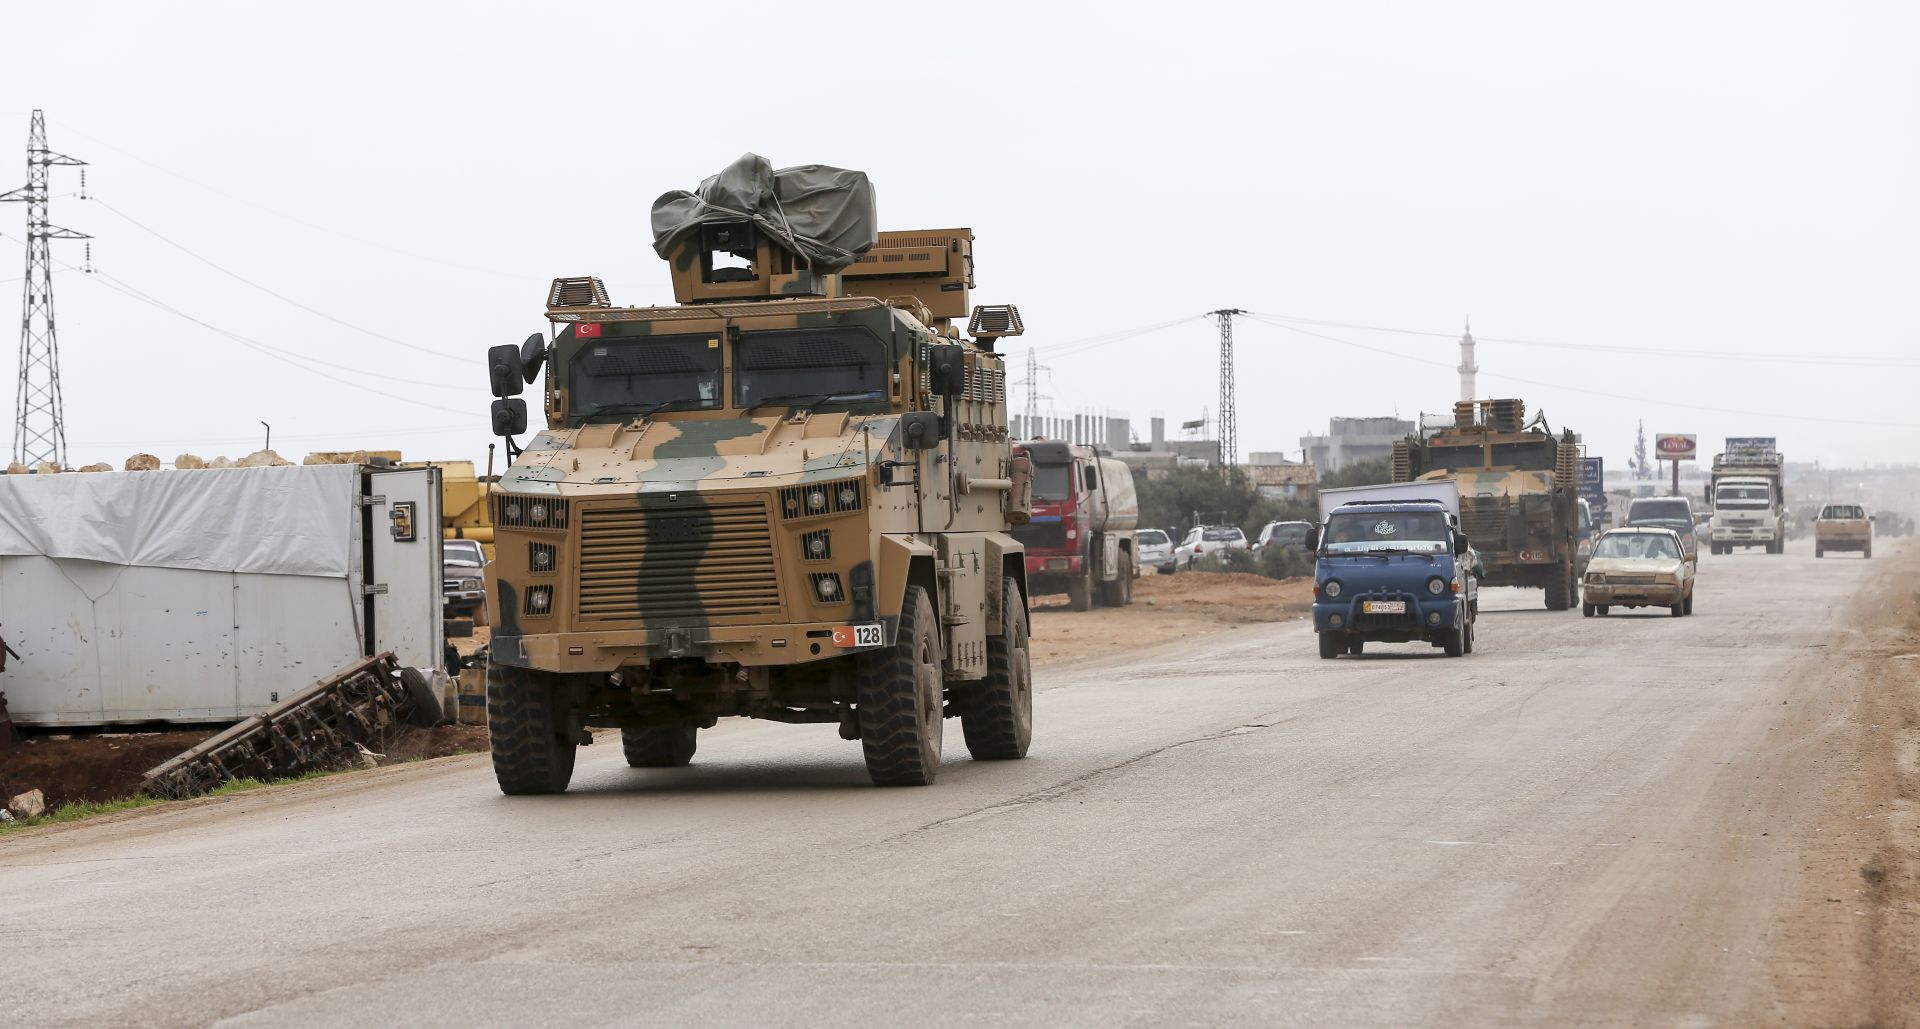 epa08235132 Turkish soldiers and a millitary armored vehicle at the Ad Dana district of north-east Idlib, Syria, 21 February 2020. According to reports, Erdogan said an operation in Syria's Idlib regions was 'imminent'.  EPA/STR